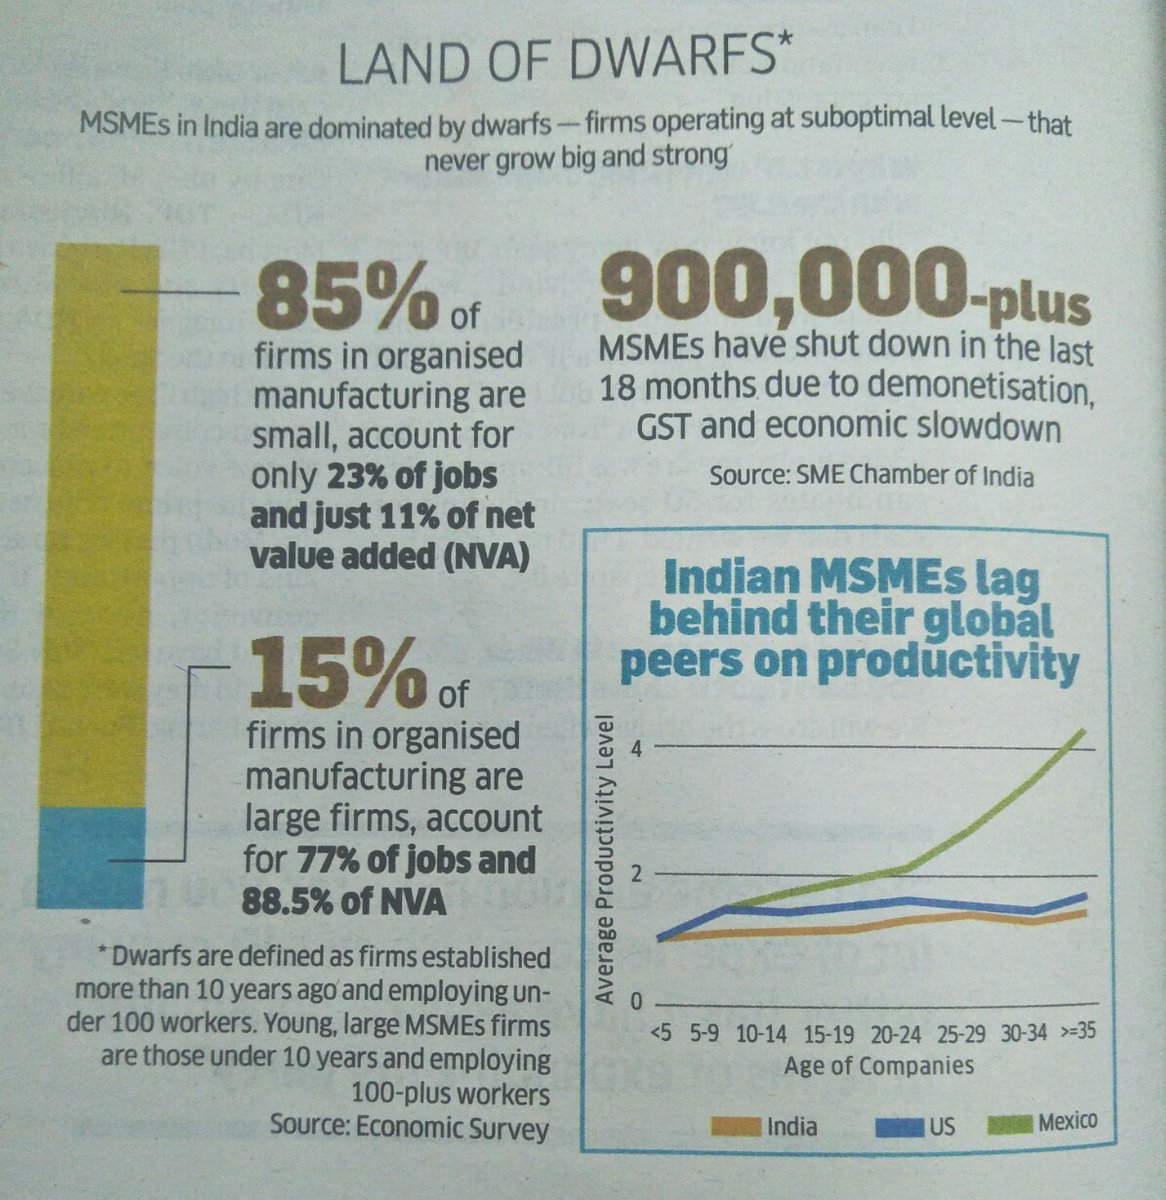 Suboptimal &cash-driven, Indian MSMEs are dominated by dwarfs — small, weak enterprises that will never grow."Dwarfs" are firms established more than 10 years ago and employing below 100 workers. [Economic Survey]"Young firms":those under 10 yrs old &employing 100+workers.